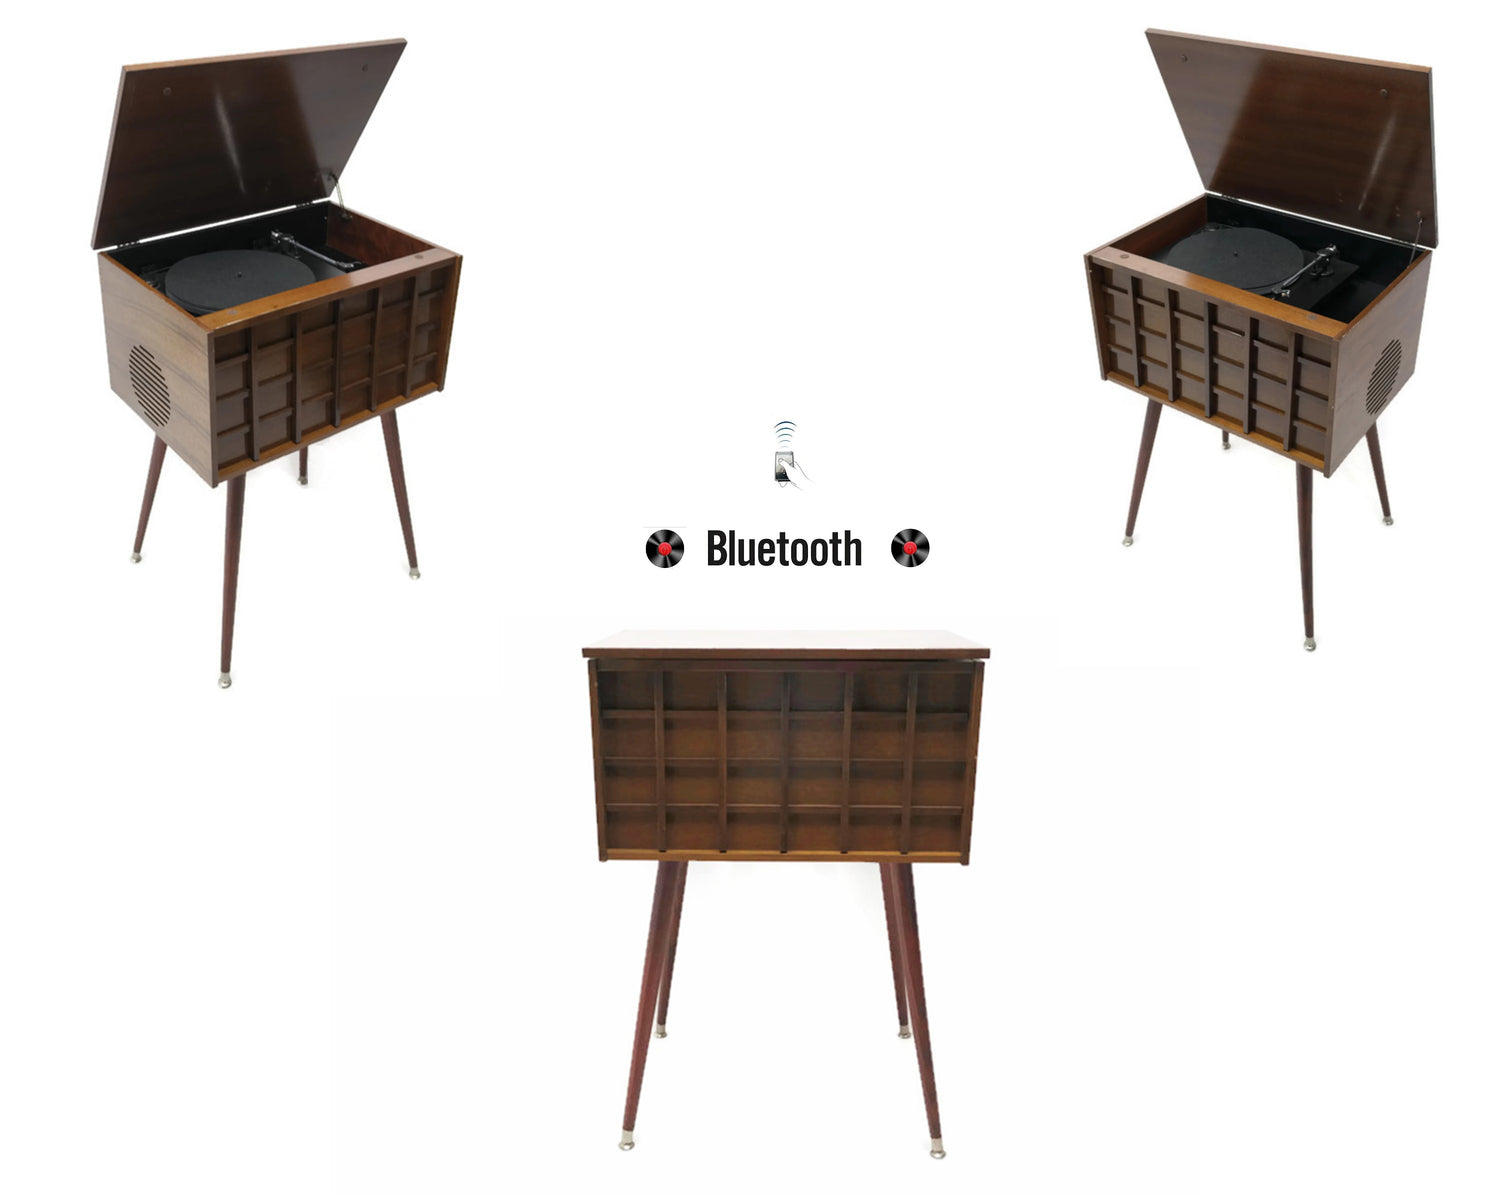 **SOLD OUT** The Vintedge Co™ - TURNTABLE READY SERIES™ - THE GRID Vintage Wood Stereo Cabinet w/Modern Turntable Record Player Stereo The Vintedge Co.